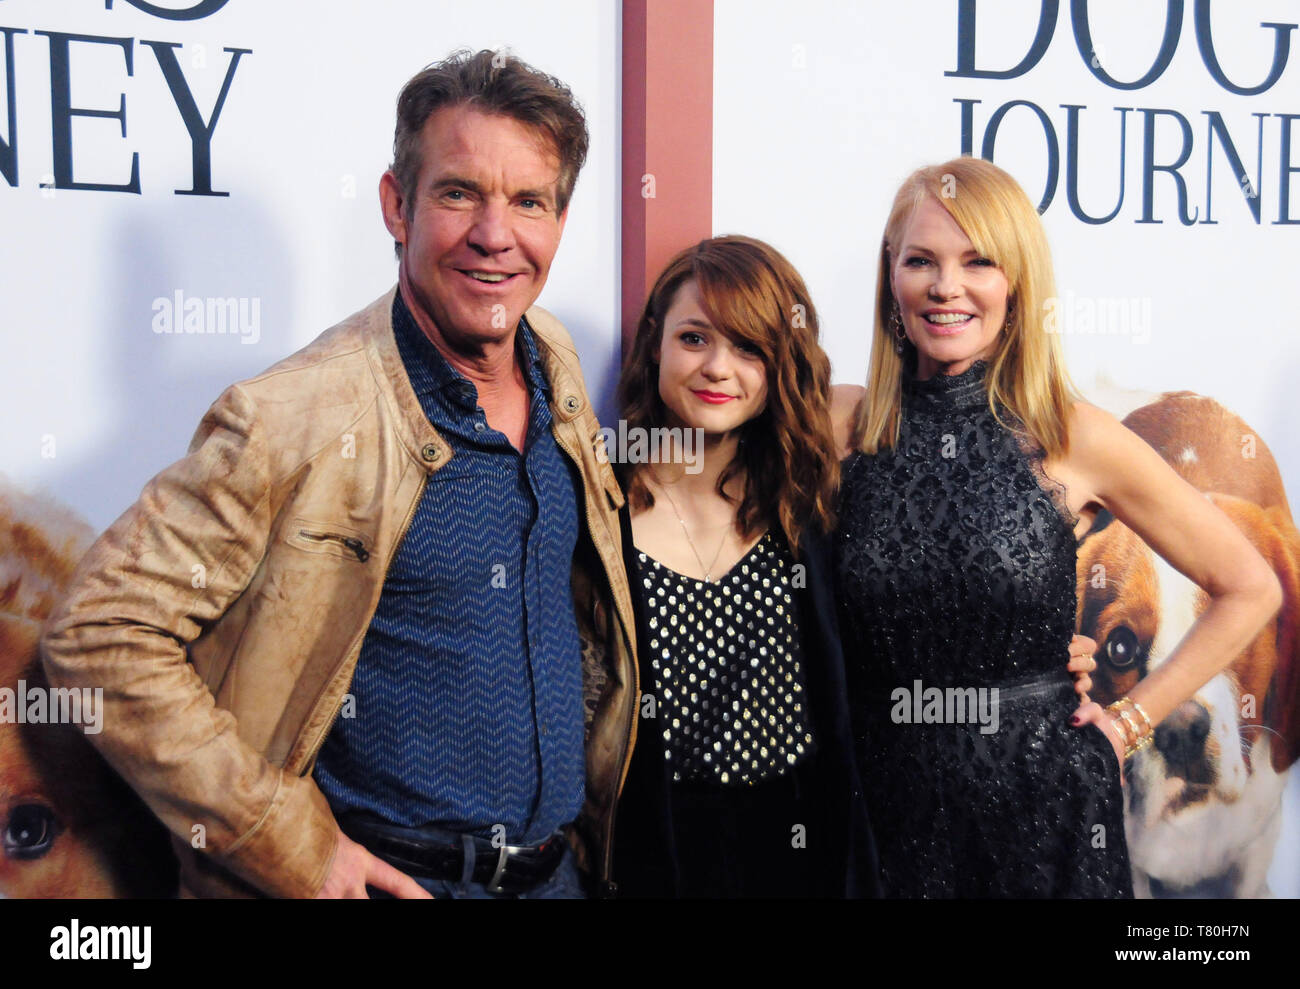 Los Angeles, California, USA 9th May 2019  Actor Dennis Quaid, actress Kathryn Prescott and actress Marg Helgenberger attend Universal Pictures and Amblin Entertainment Present The Premiere of A Dog's Journey on May 9, 2019 at Arclight Hollywood in Los Angeles, California, USA. Photo by Barry King/Alamy Live News Stock Photo